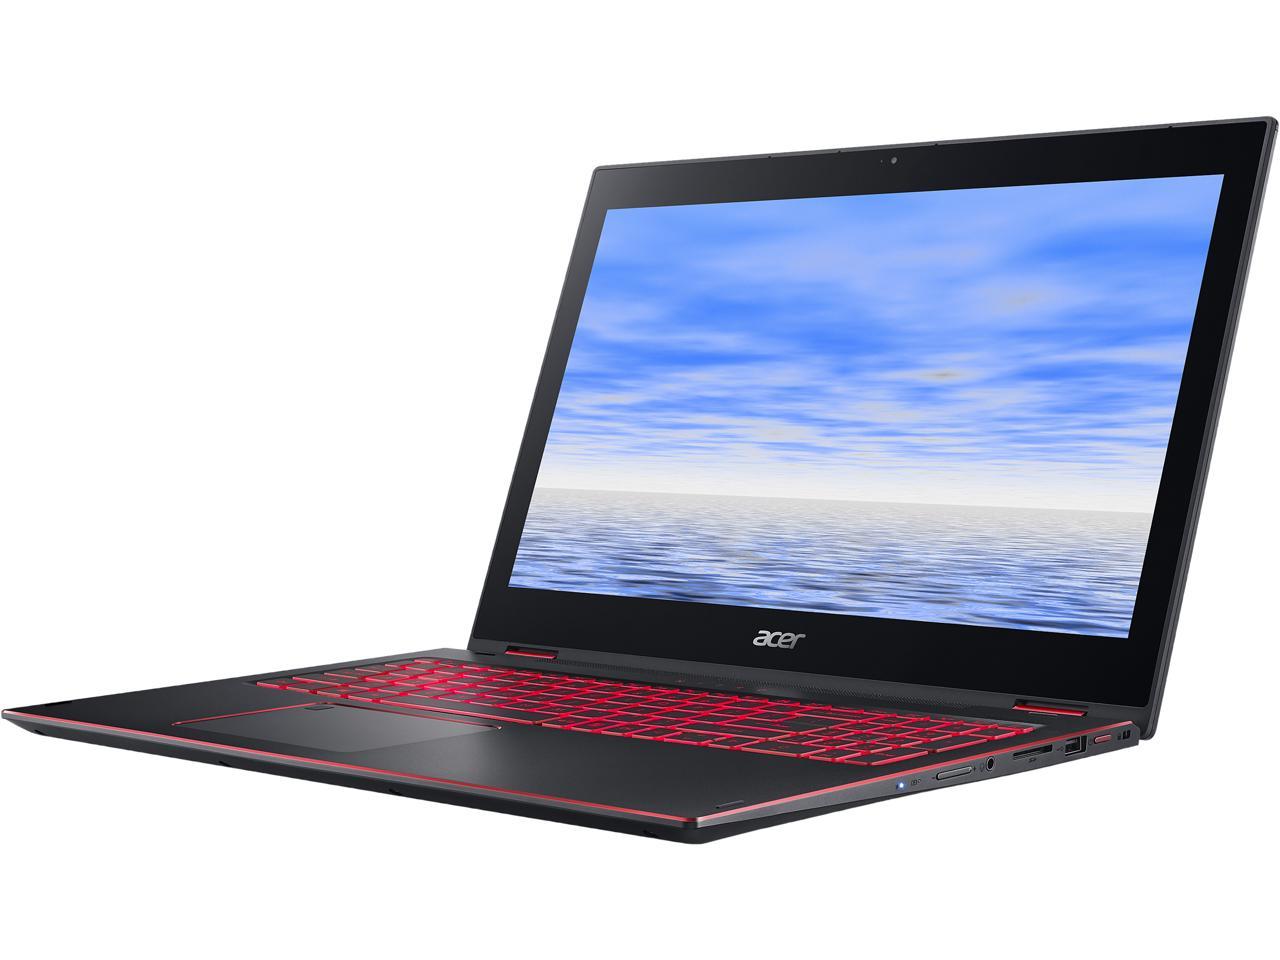 Acer Nitro 5 Spin NP515-51-887W 2-in-1 Laptop Intel Core i7-8550U 1.80 GHz 15.6" Windows 10 Home